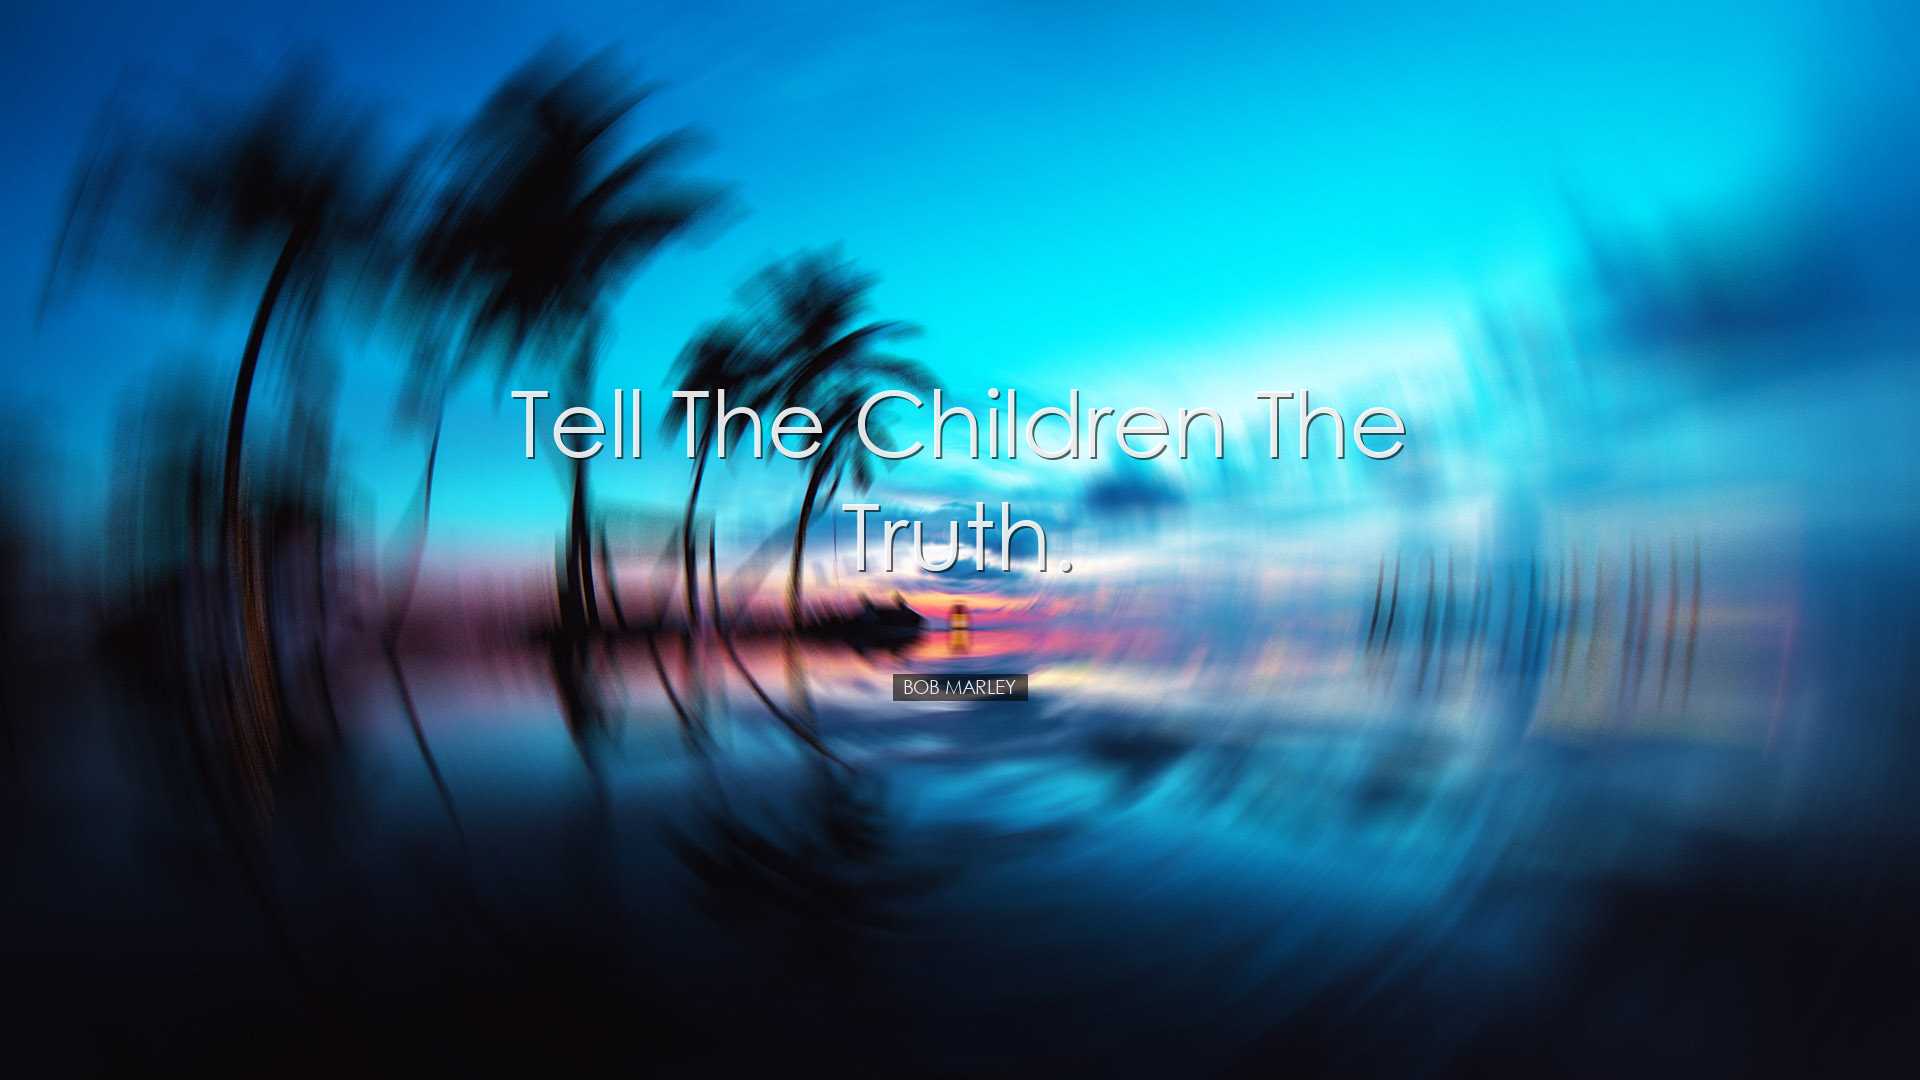 Tell the children the truth. - Bob Marley